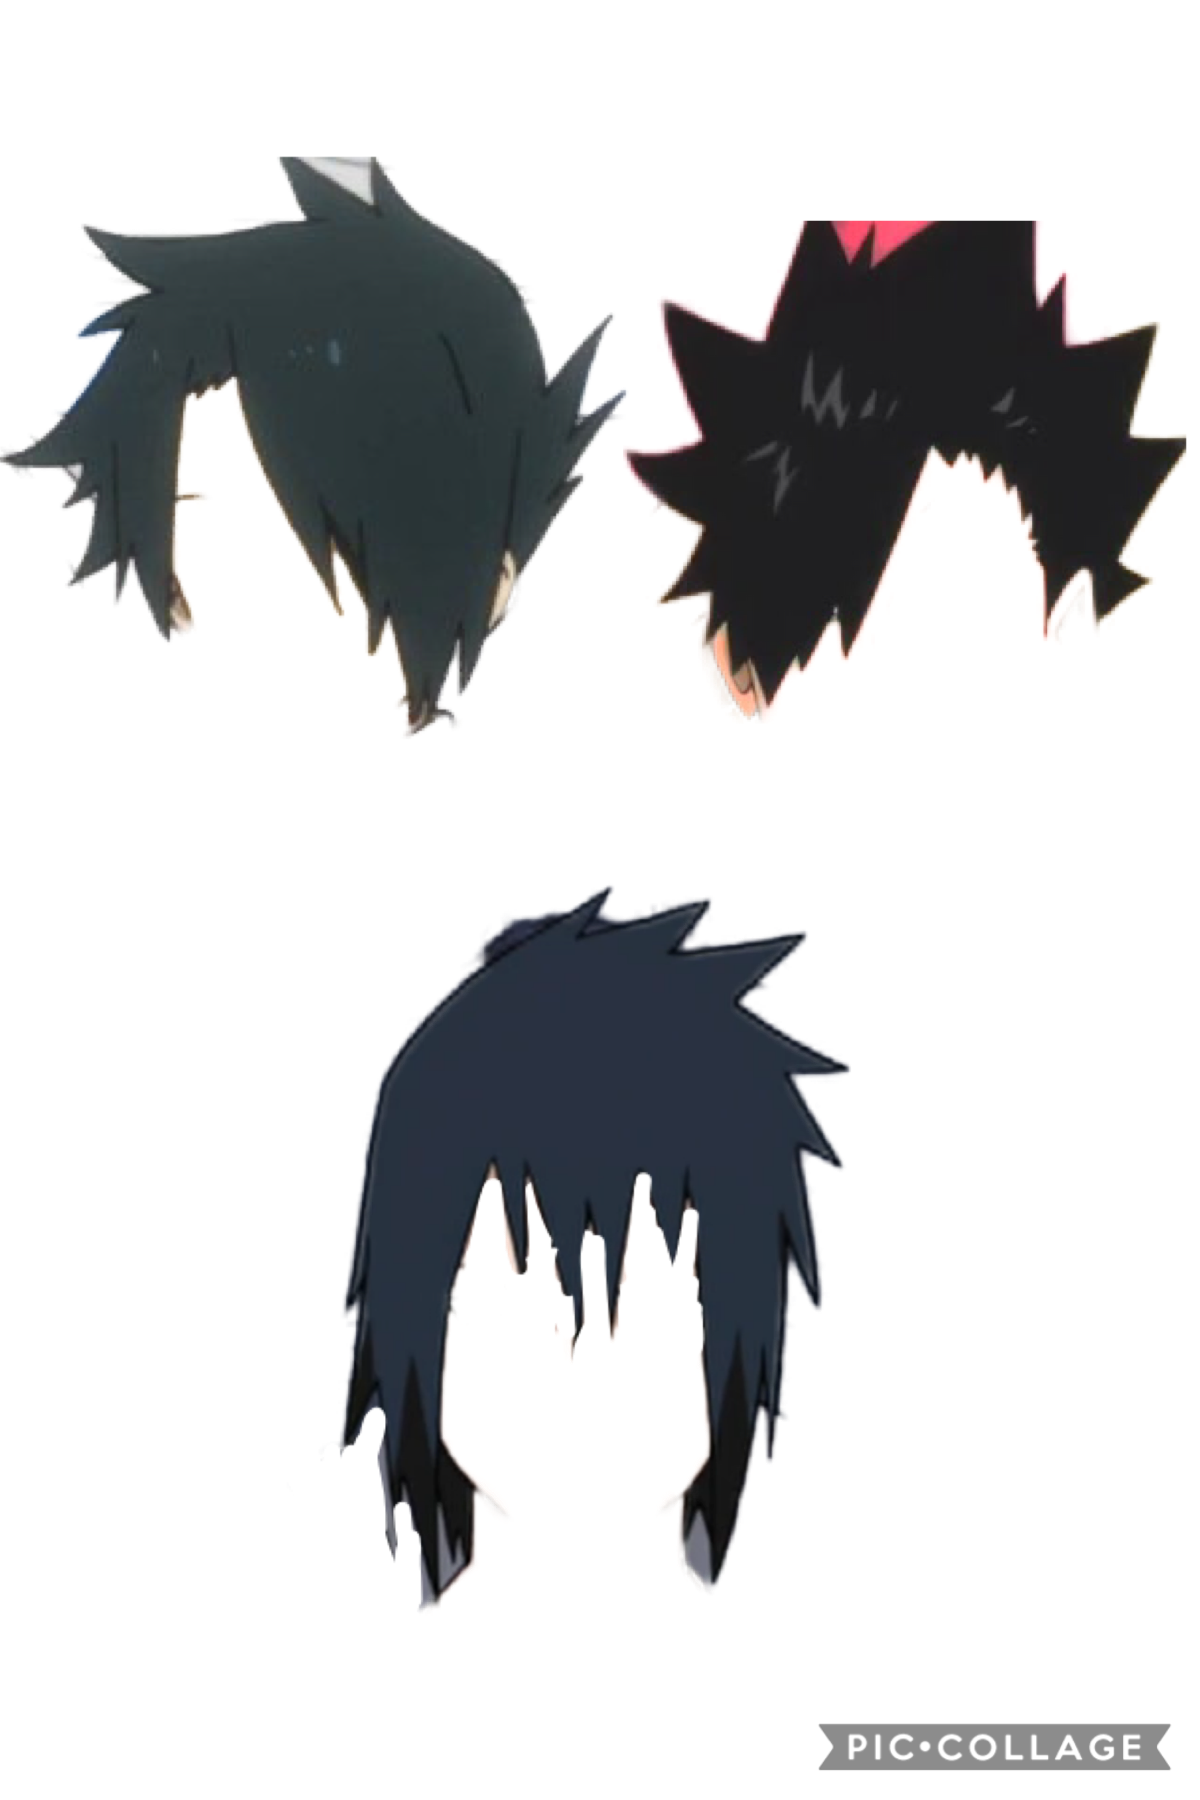 Eyyyyyyy guess the character by the hair